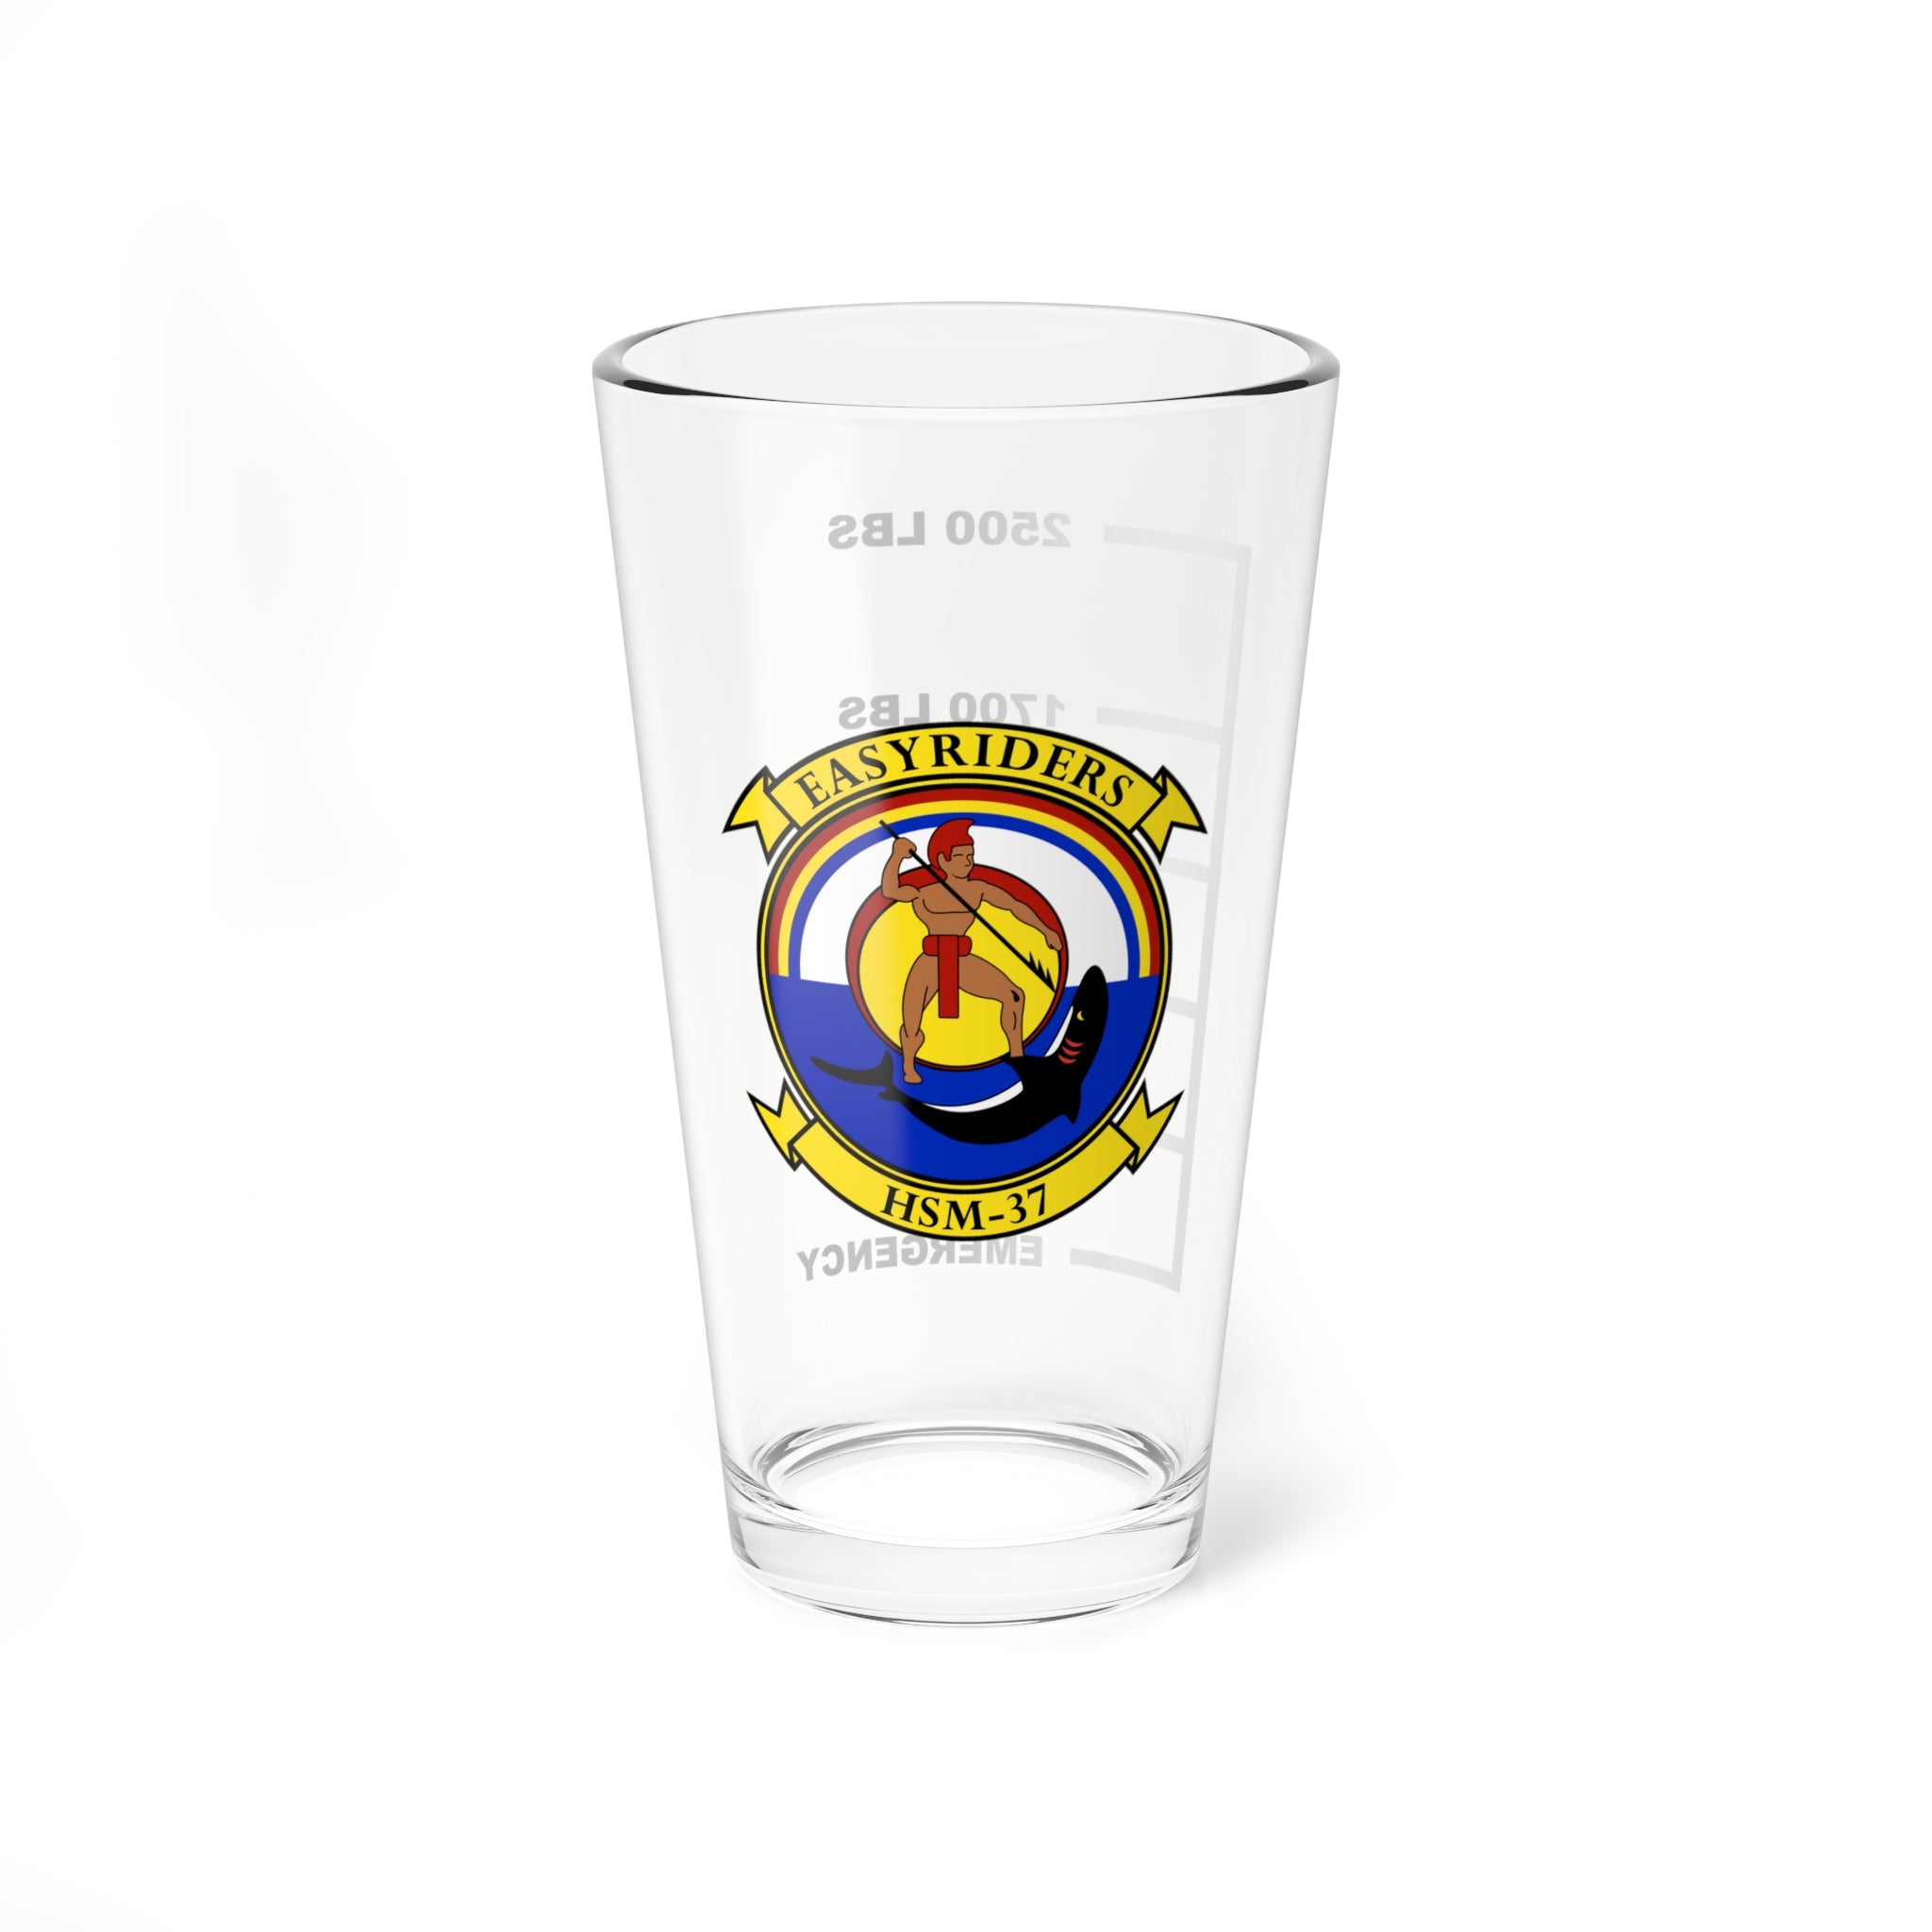 HSL-37 "Easyriders" Fuel Low Pint Glass Mixing Glass, 16oz, Navy, Aviation, Wings, Veteran, Helicopter, SH-2, HSL